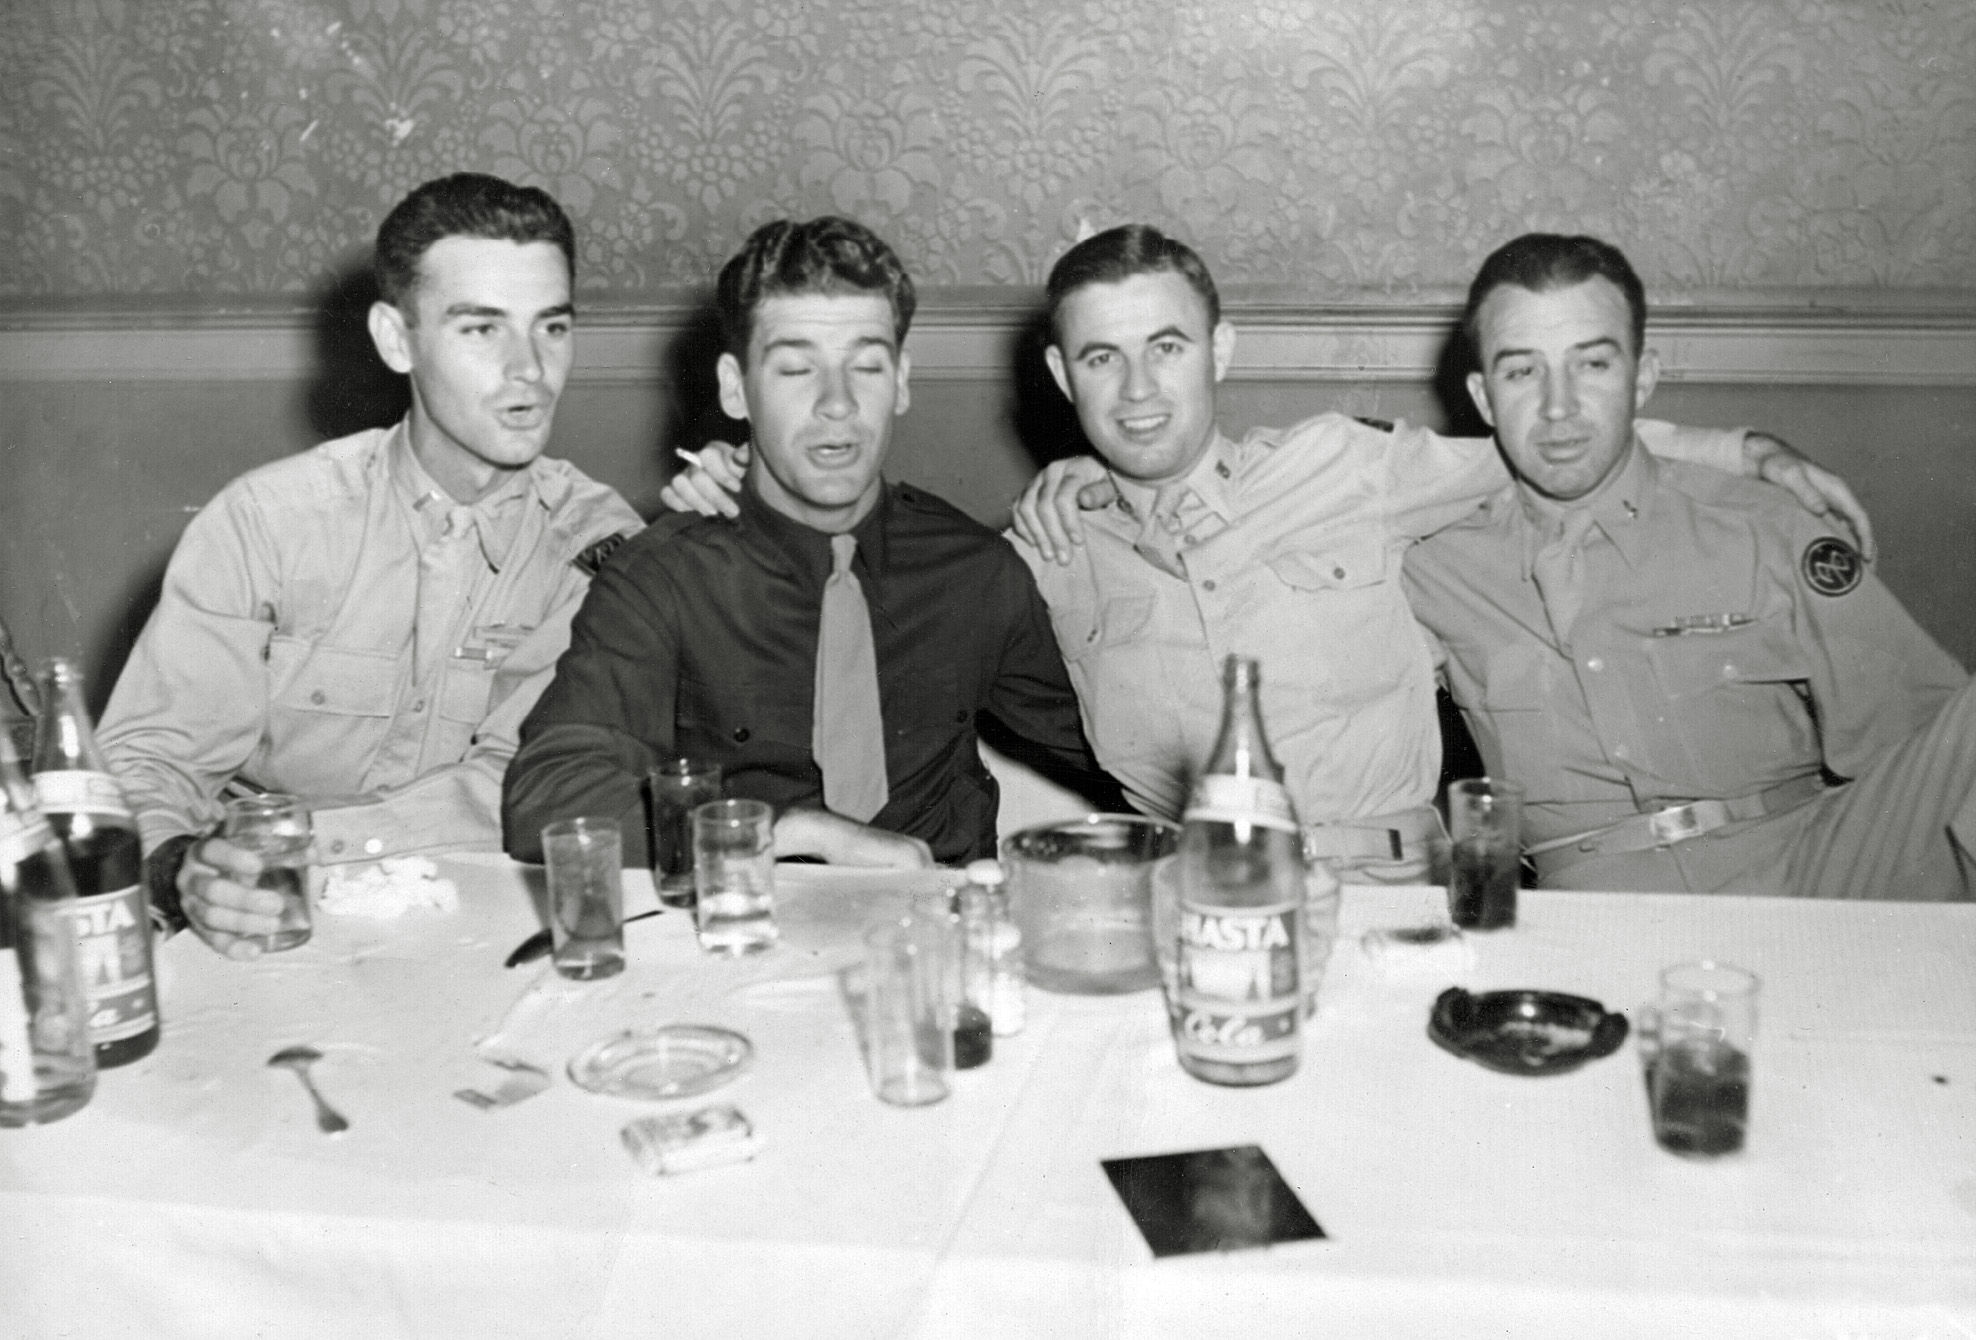 I love this one. This is my Dad's (on the left) first night on the town in the states after more than three years fighting with the 27th ID in the Pacific, around October 1945, near Seattle. He arrived in Washington state from Japan that day after being part of the first occupational forces. These guys are happy to be back! View full size.